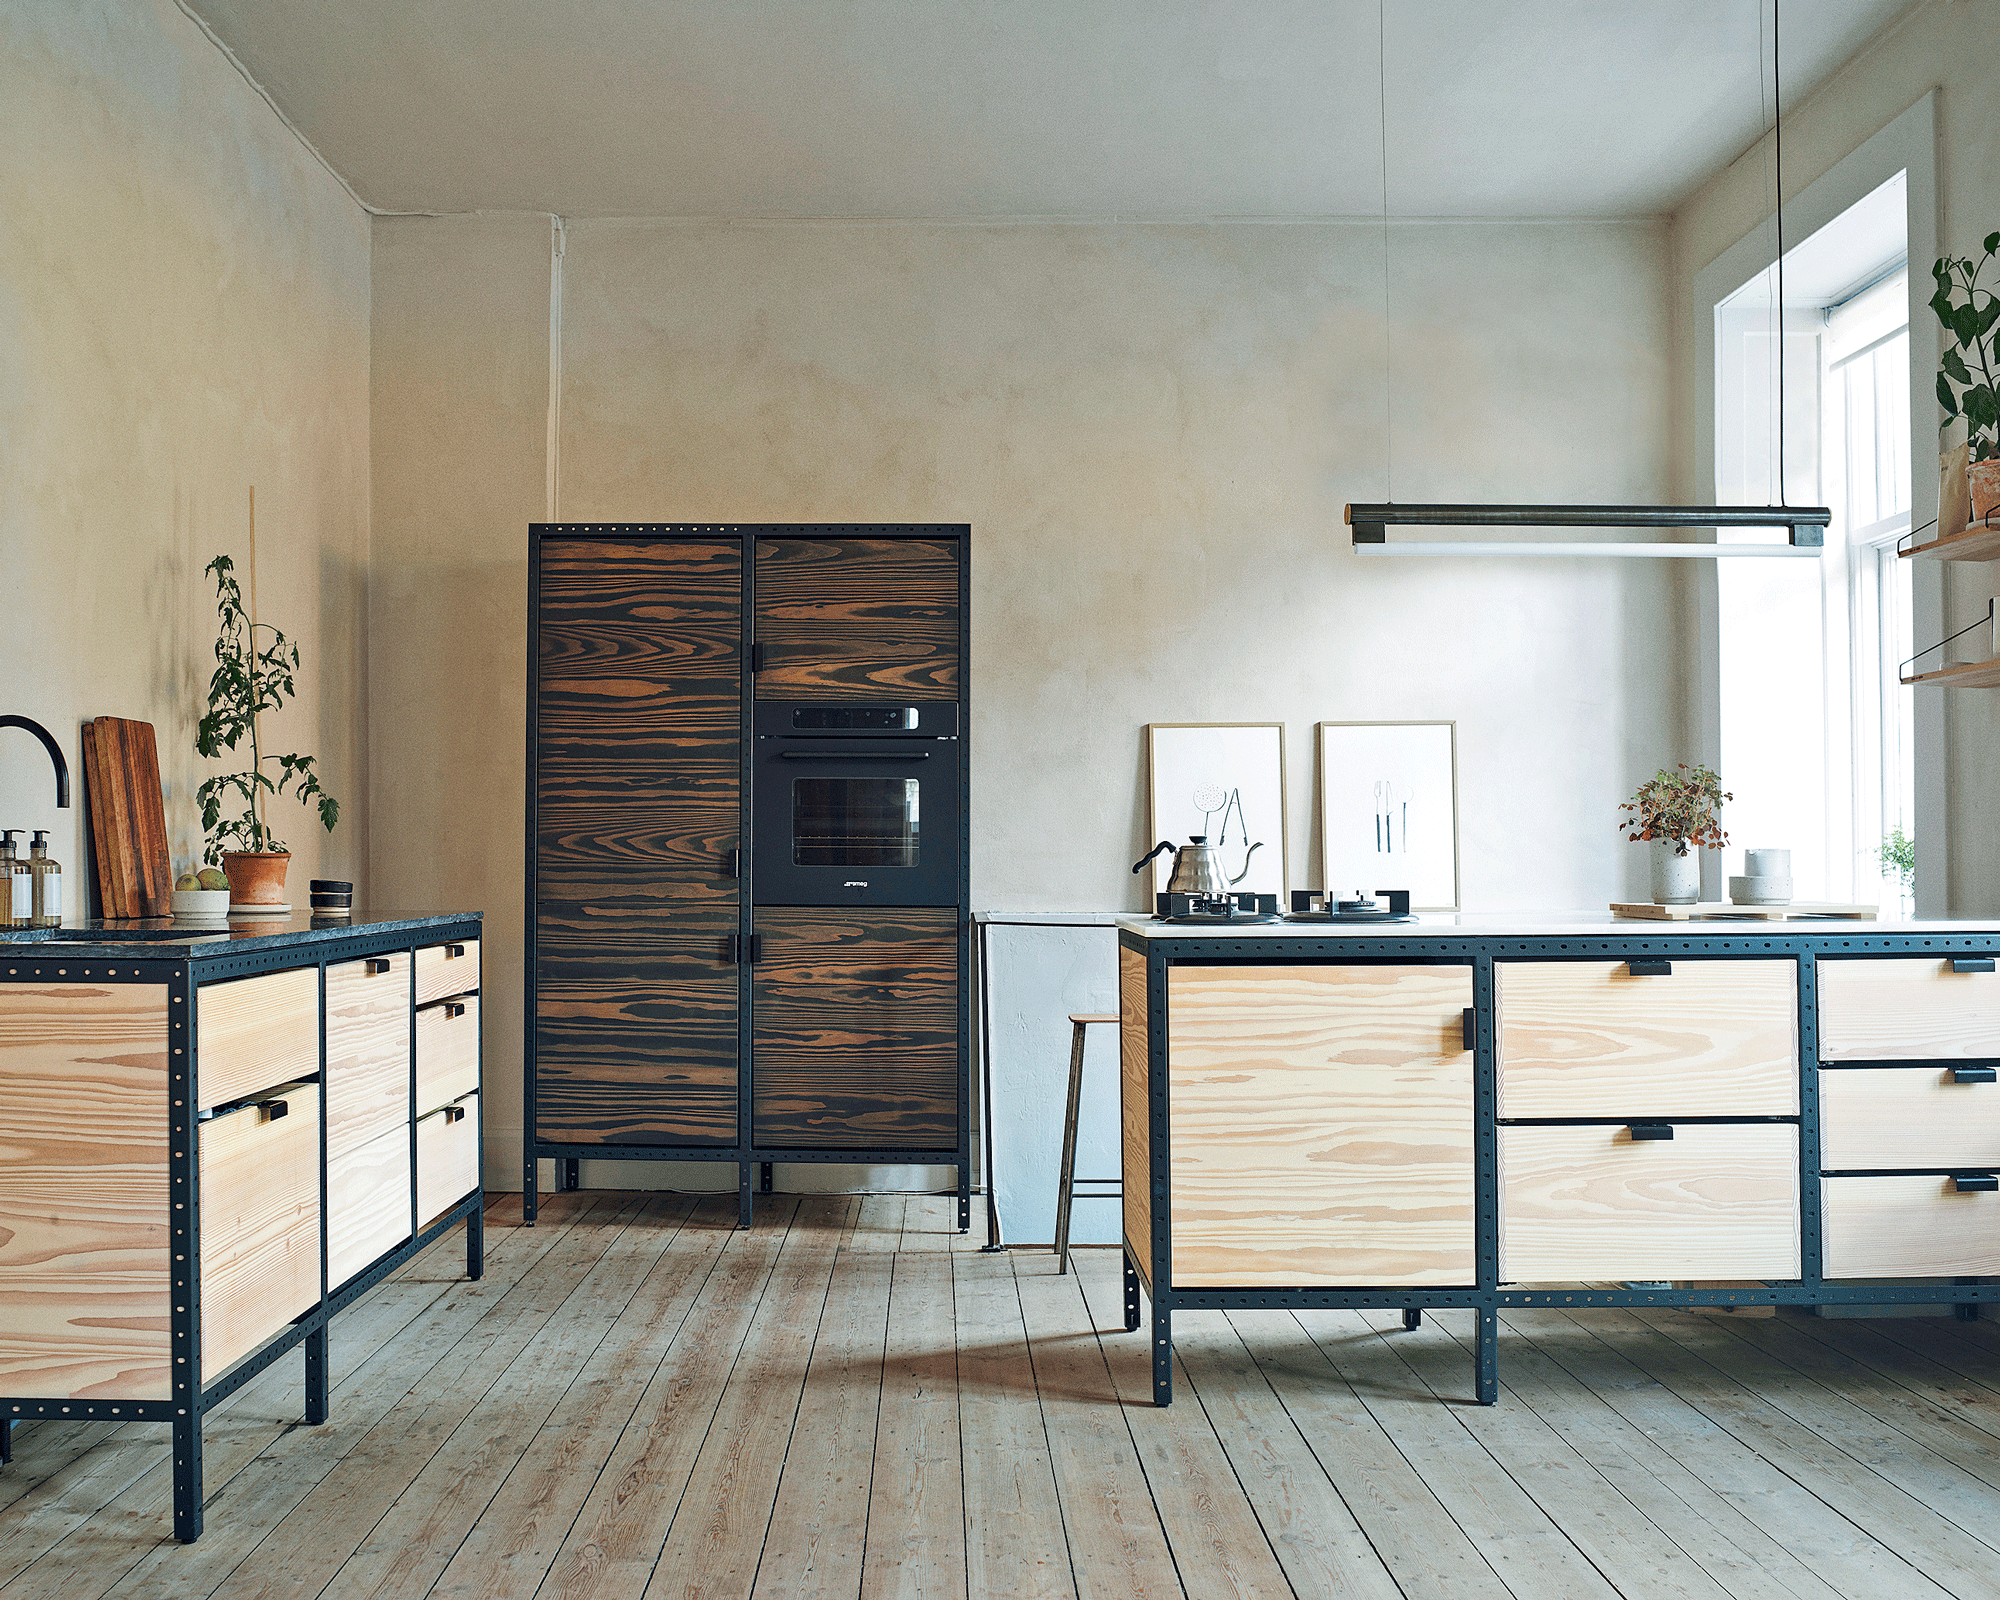 A wooden freestanding kitchen with black edging